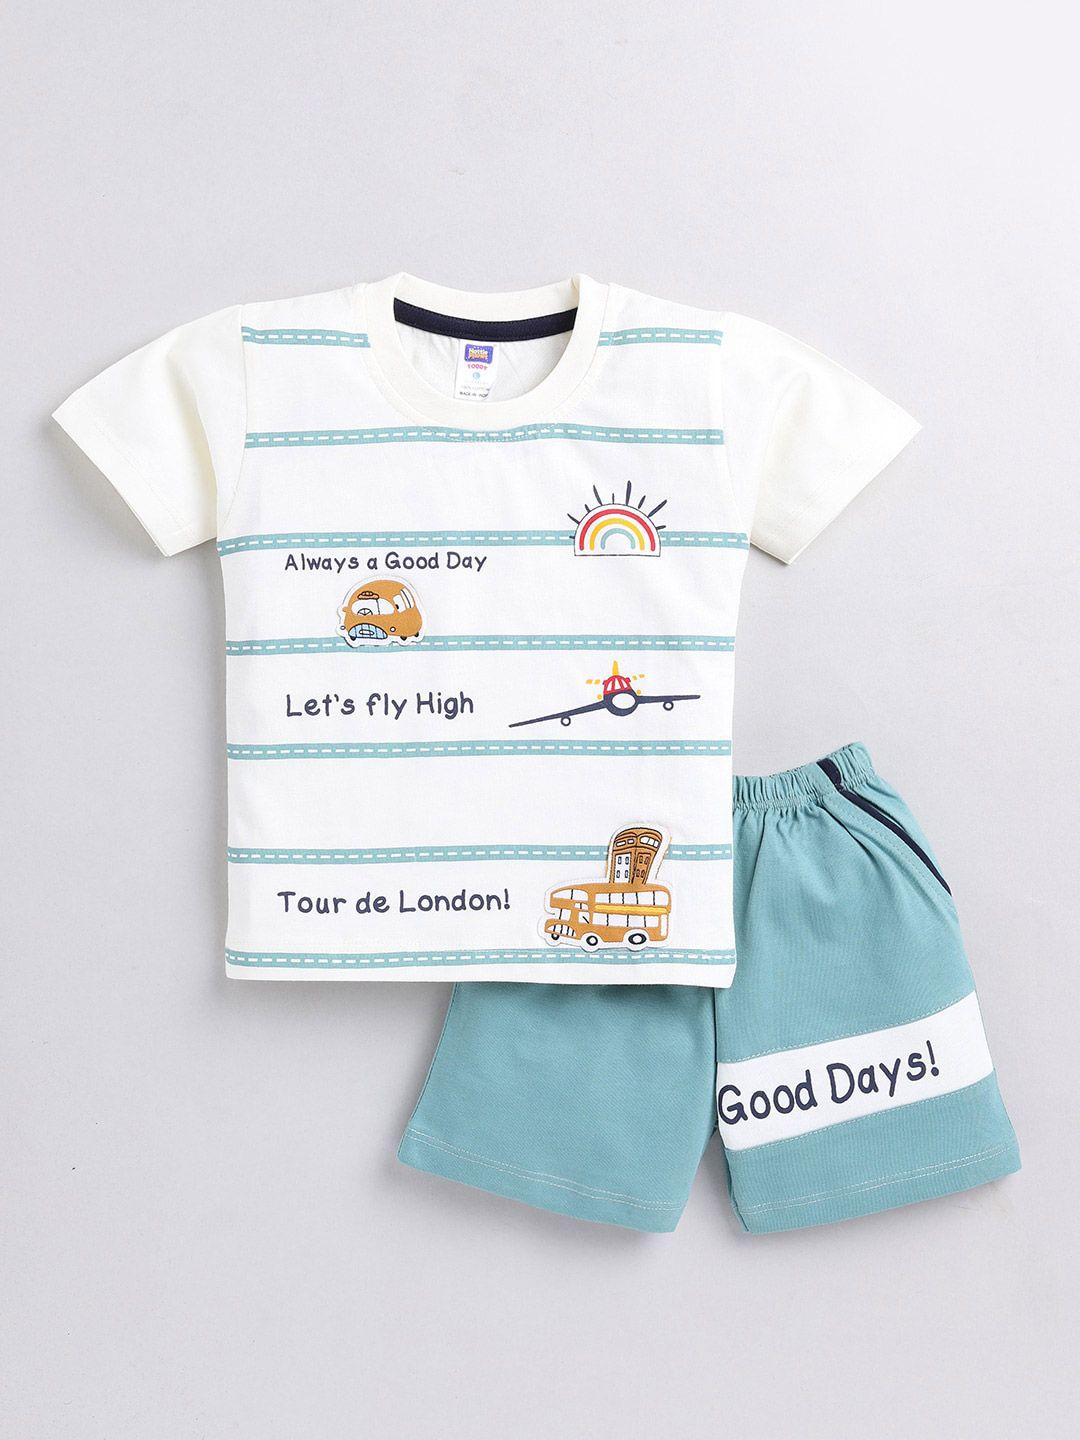 nottie planet boys printed pure cotton t-shirt with shorts